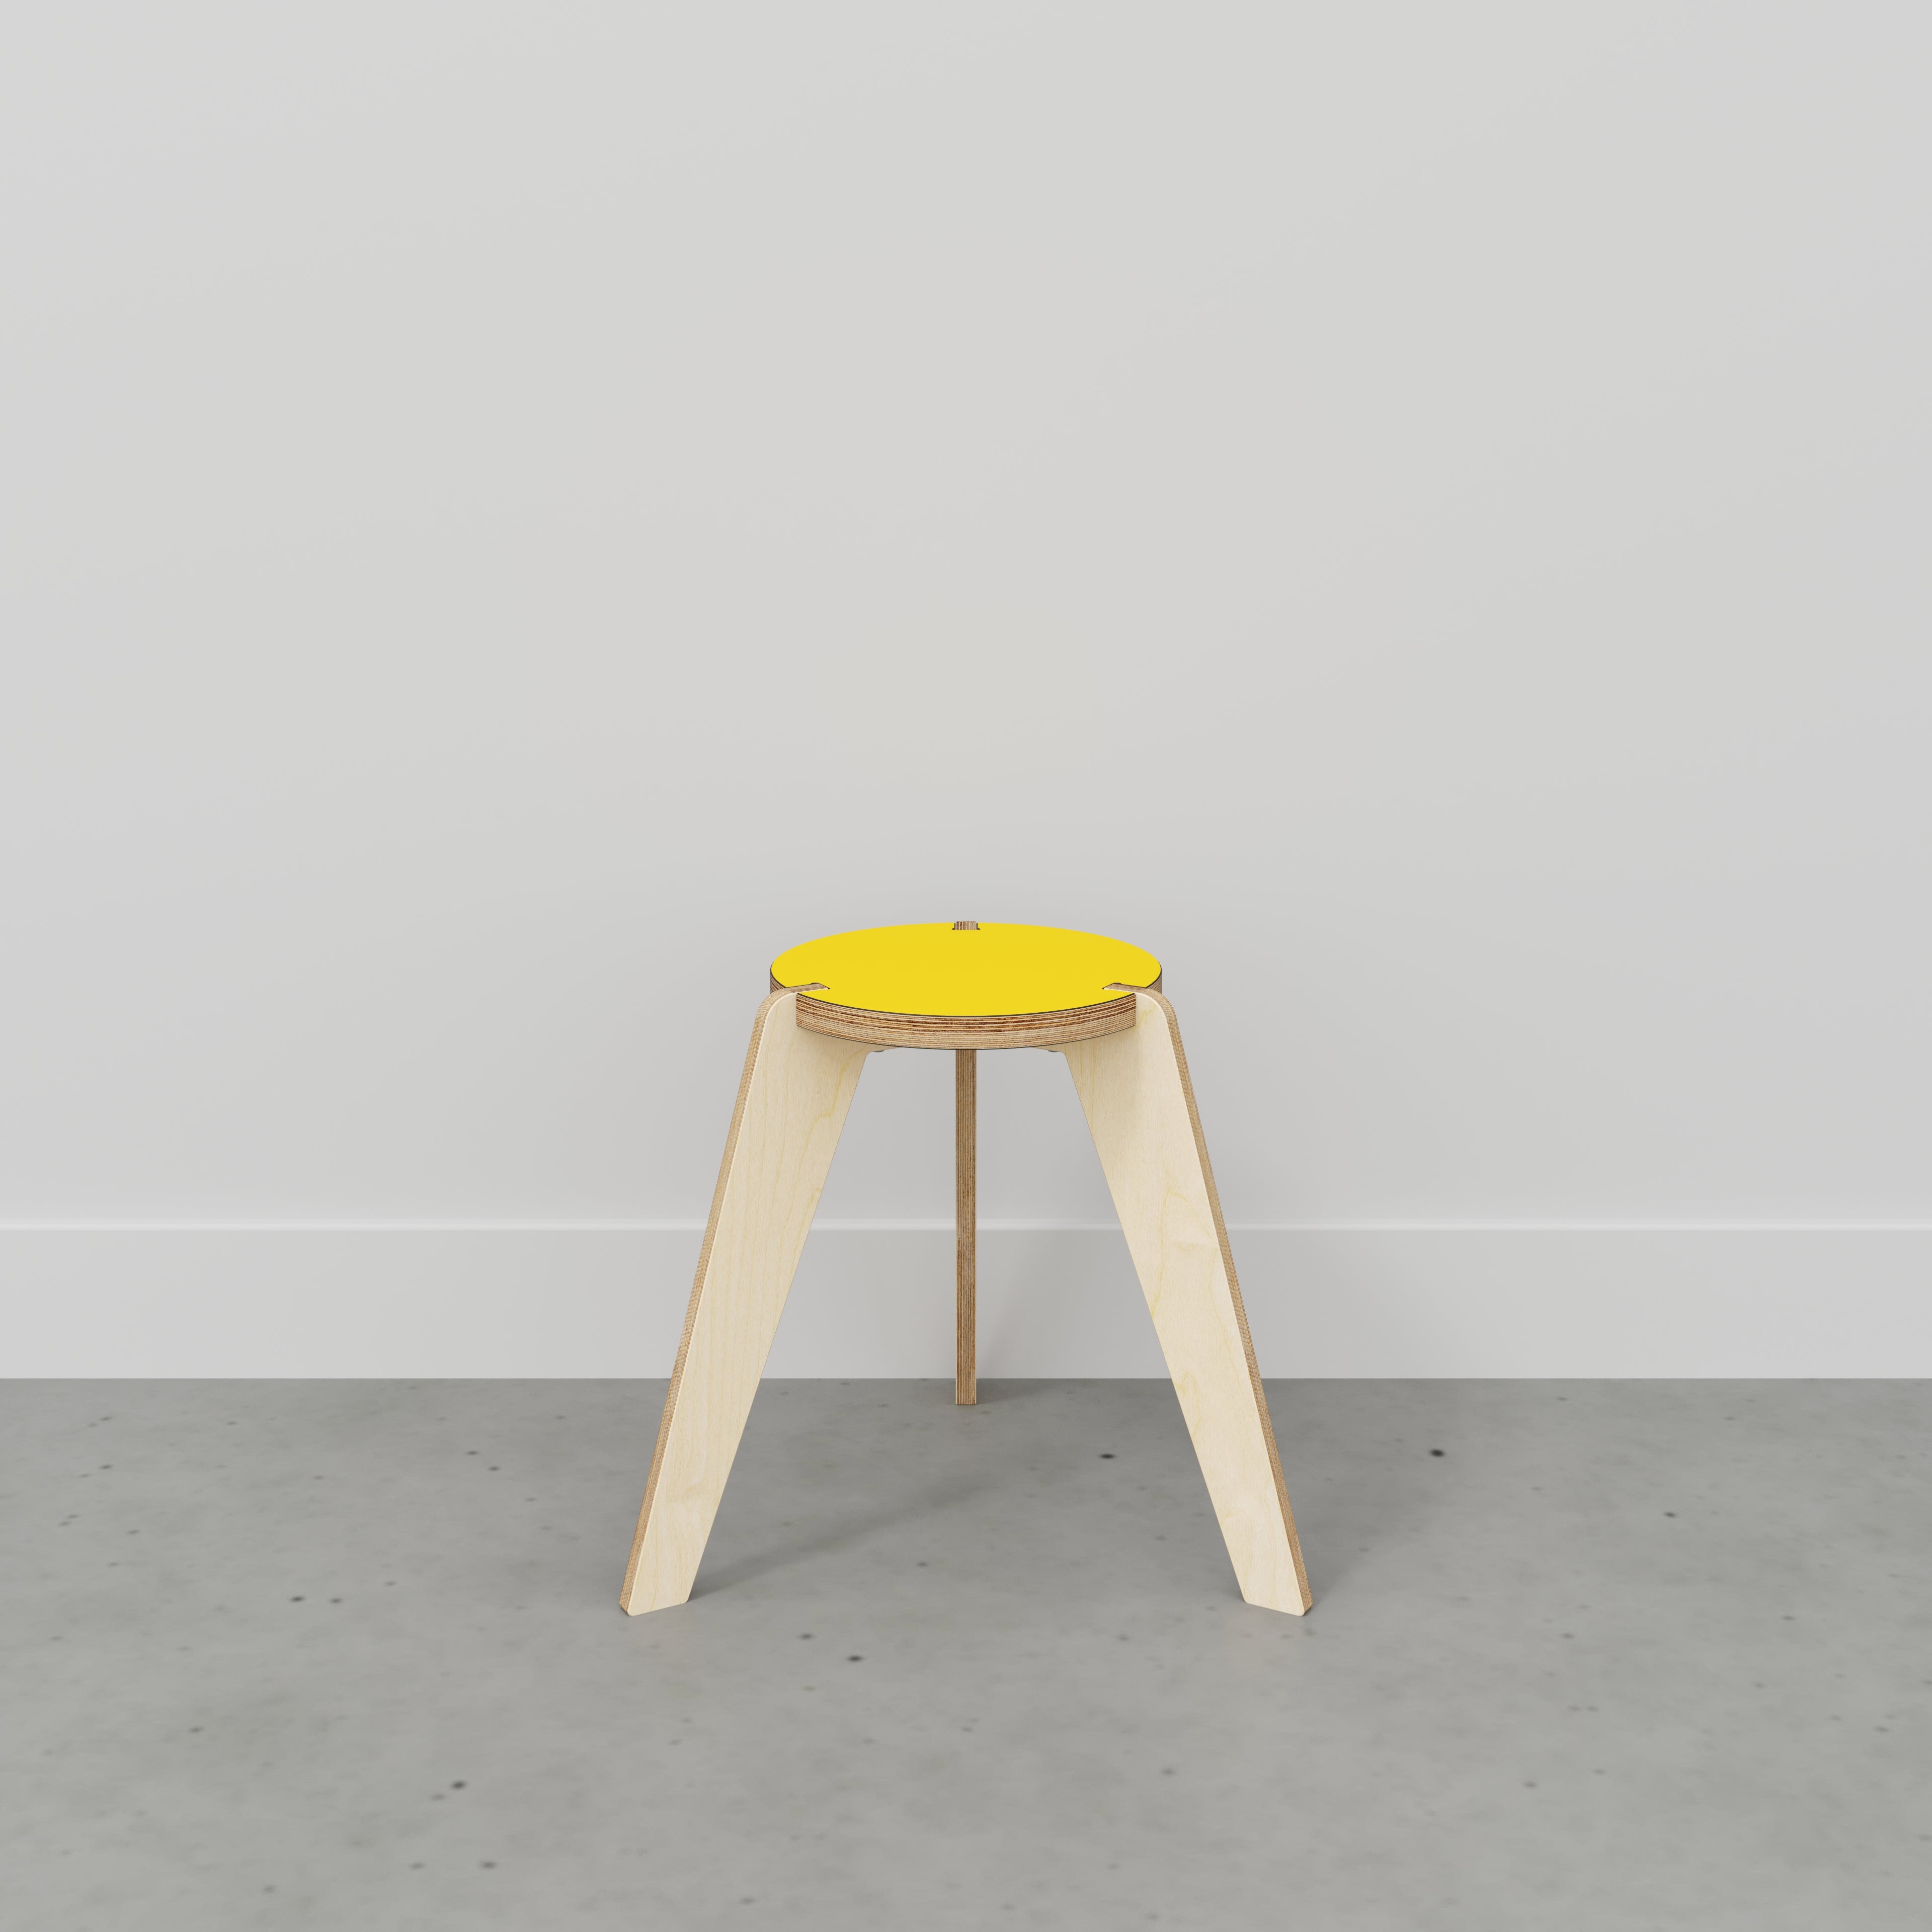 Round Stool with Plywood Legs - Formica Chrome Yellow - 525(w) x 450(d) x 450(h)